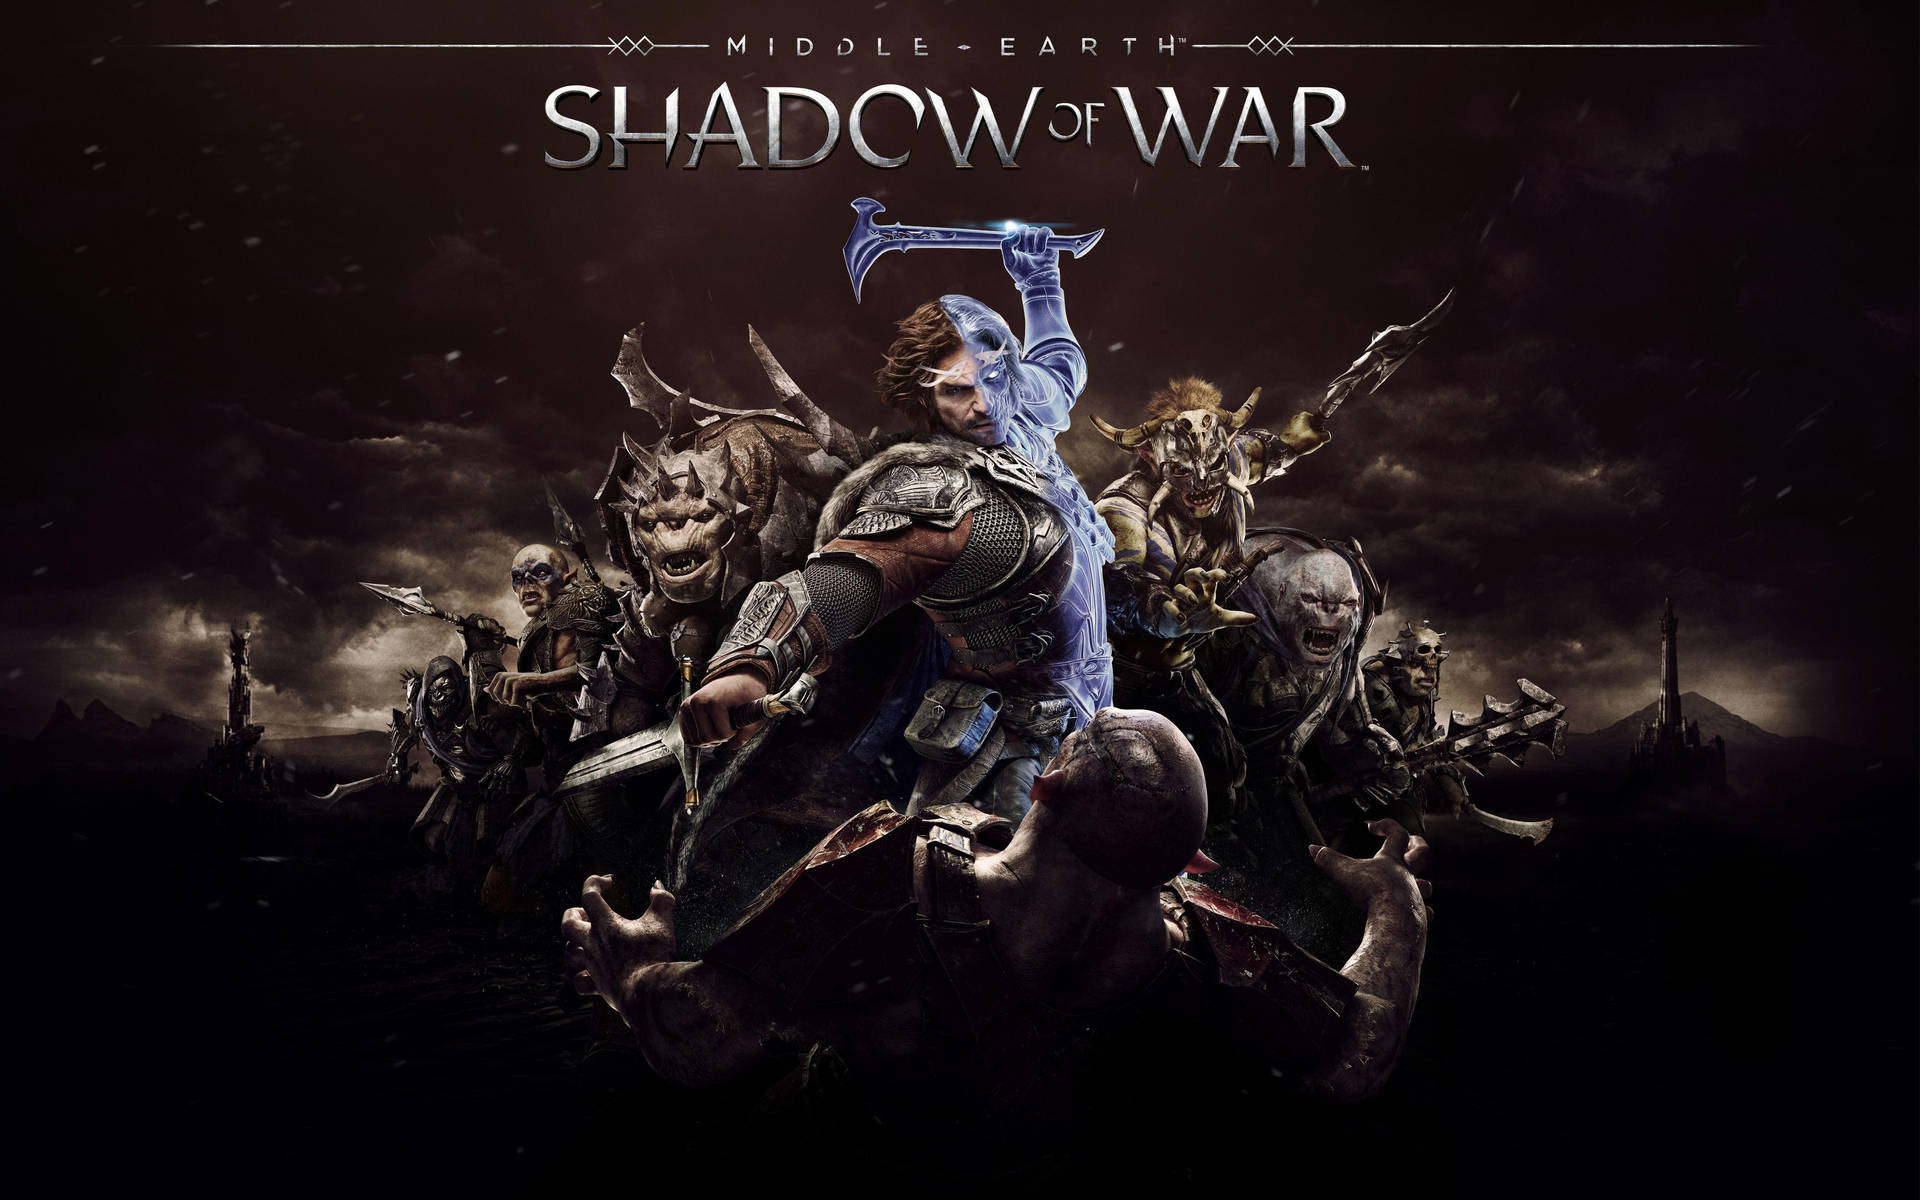 Caption: Heroes of Middle Earth: Battle in Shadow of War Wallpaper